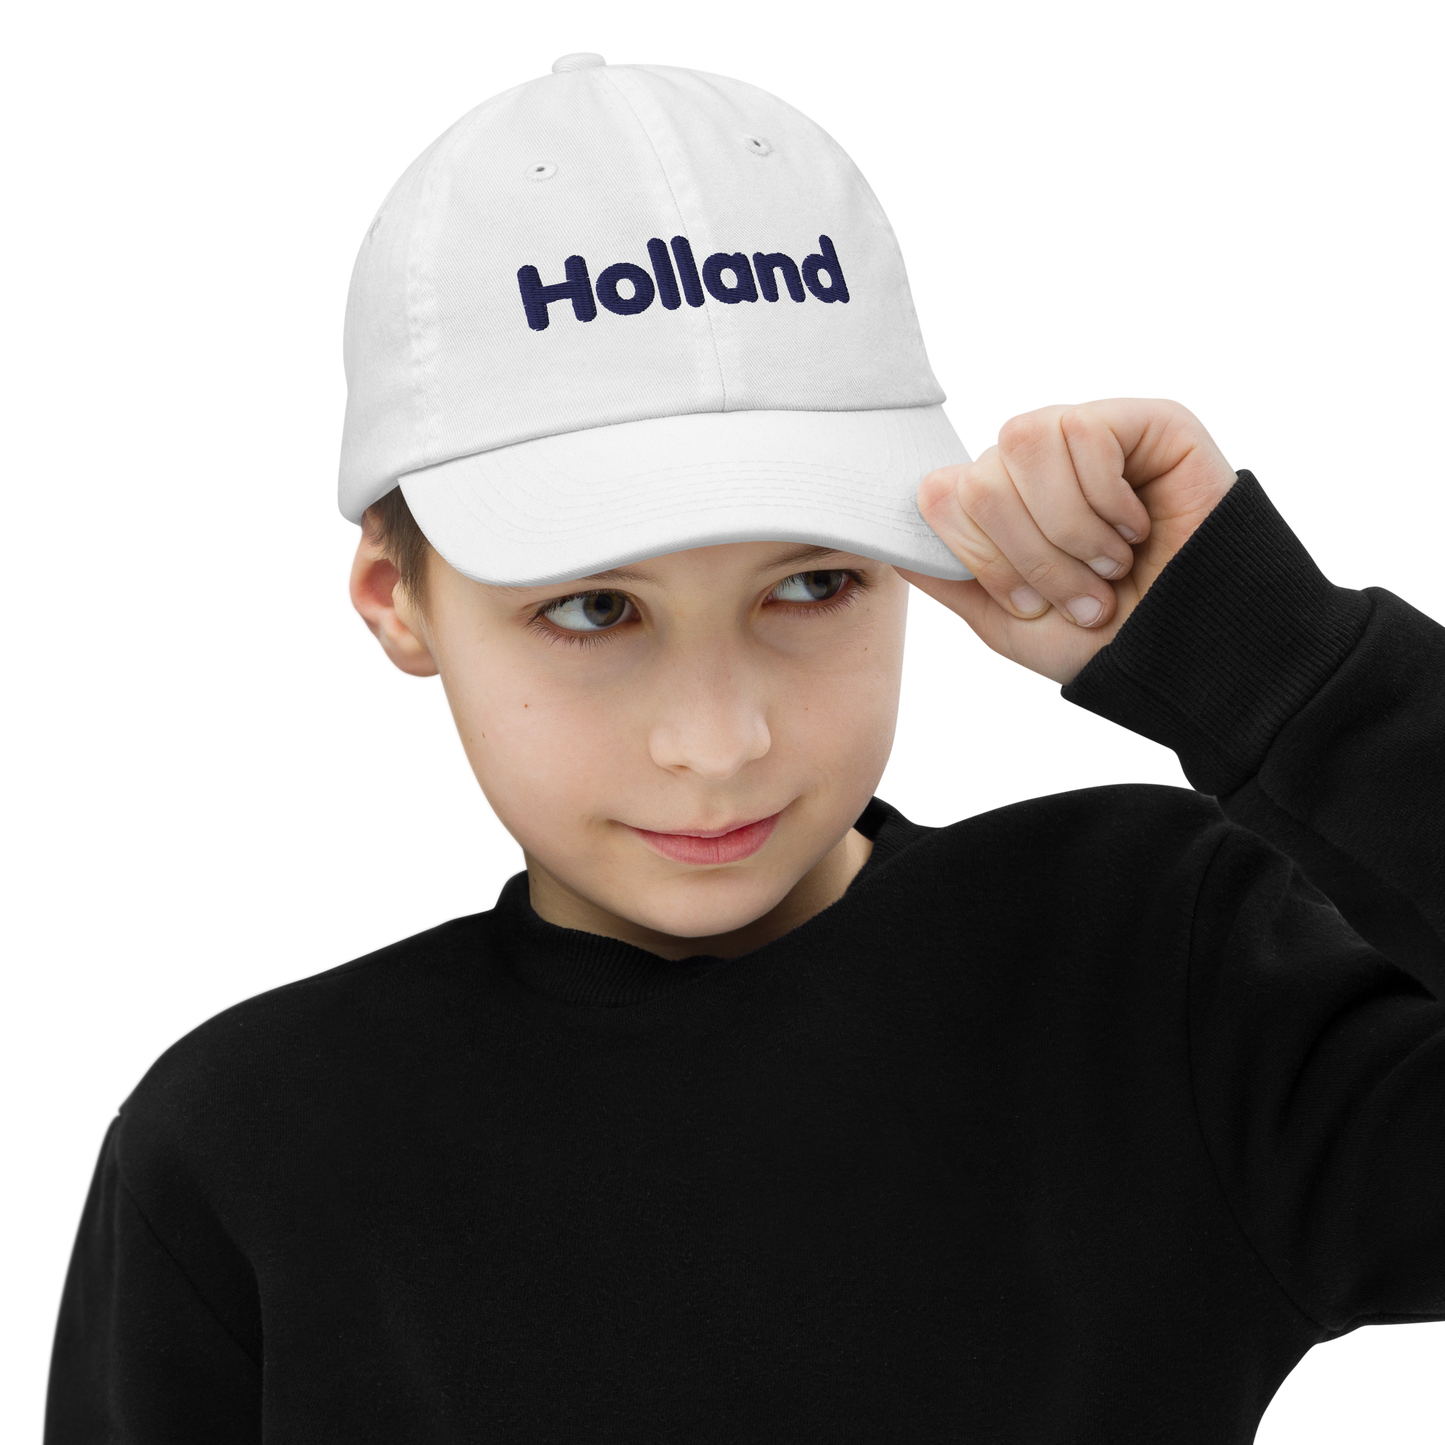 'Holland' Youth Baseball Cap | White/Navy Embrodiery